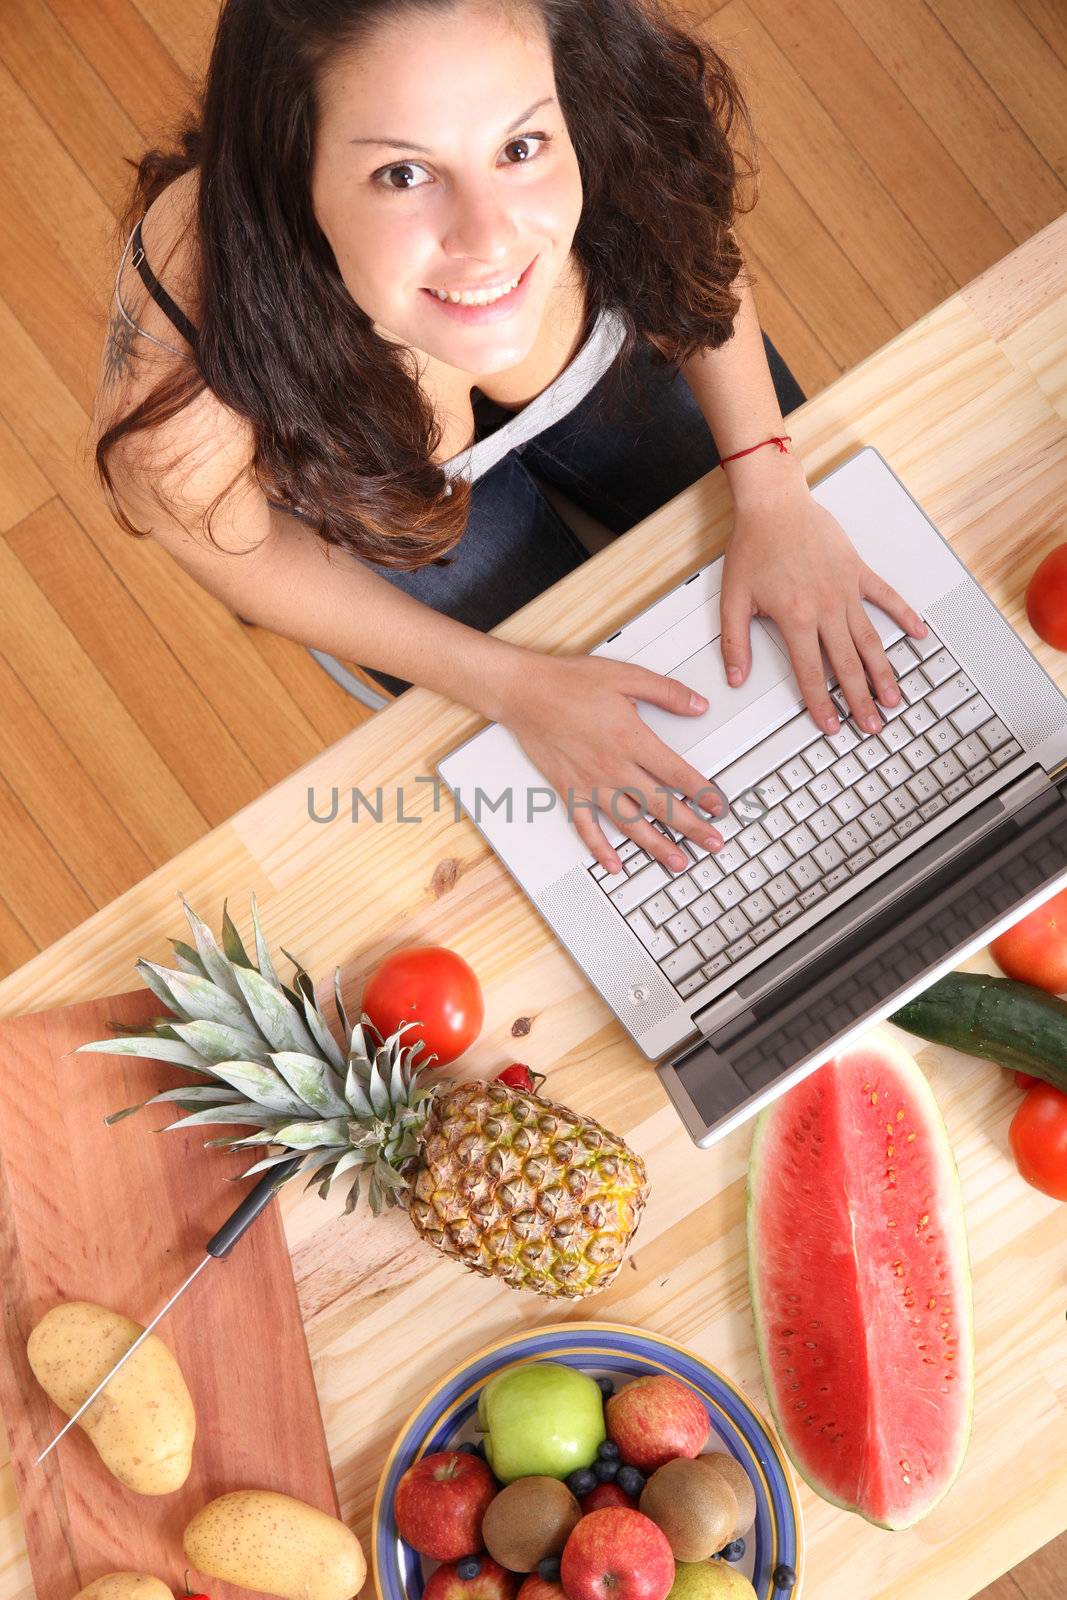 A young woman using a Laptop while cooking.